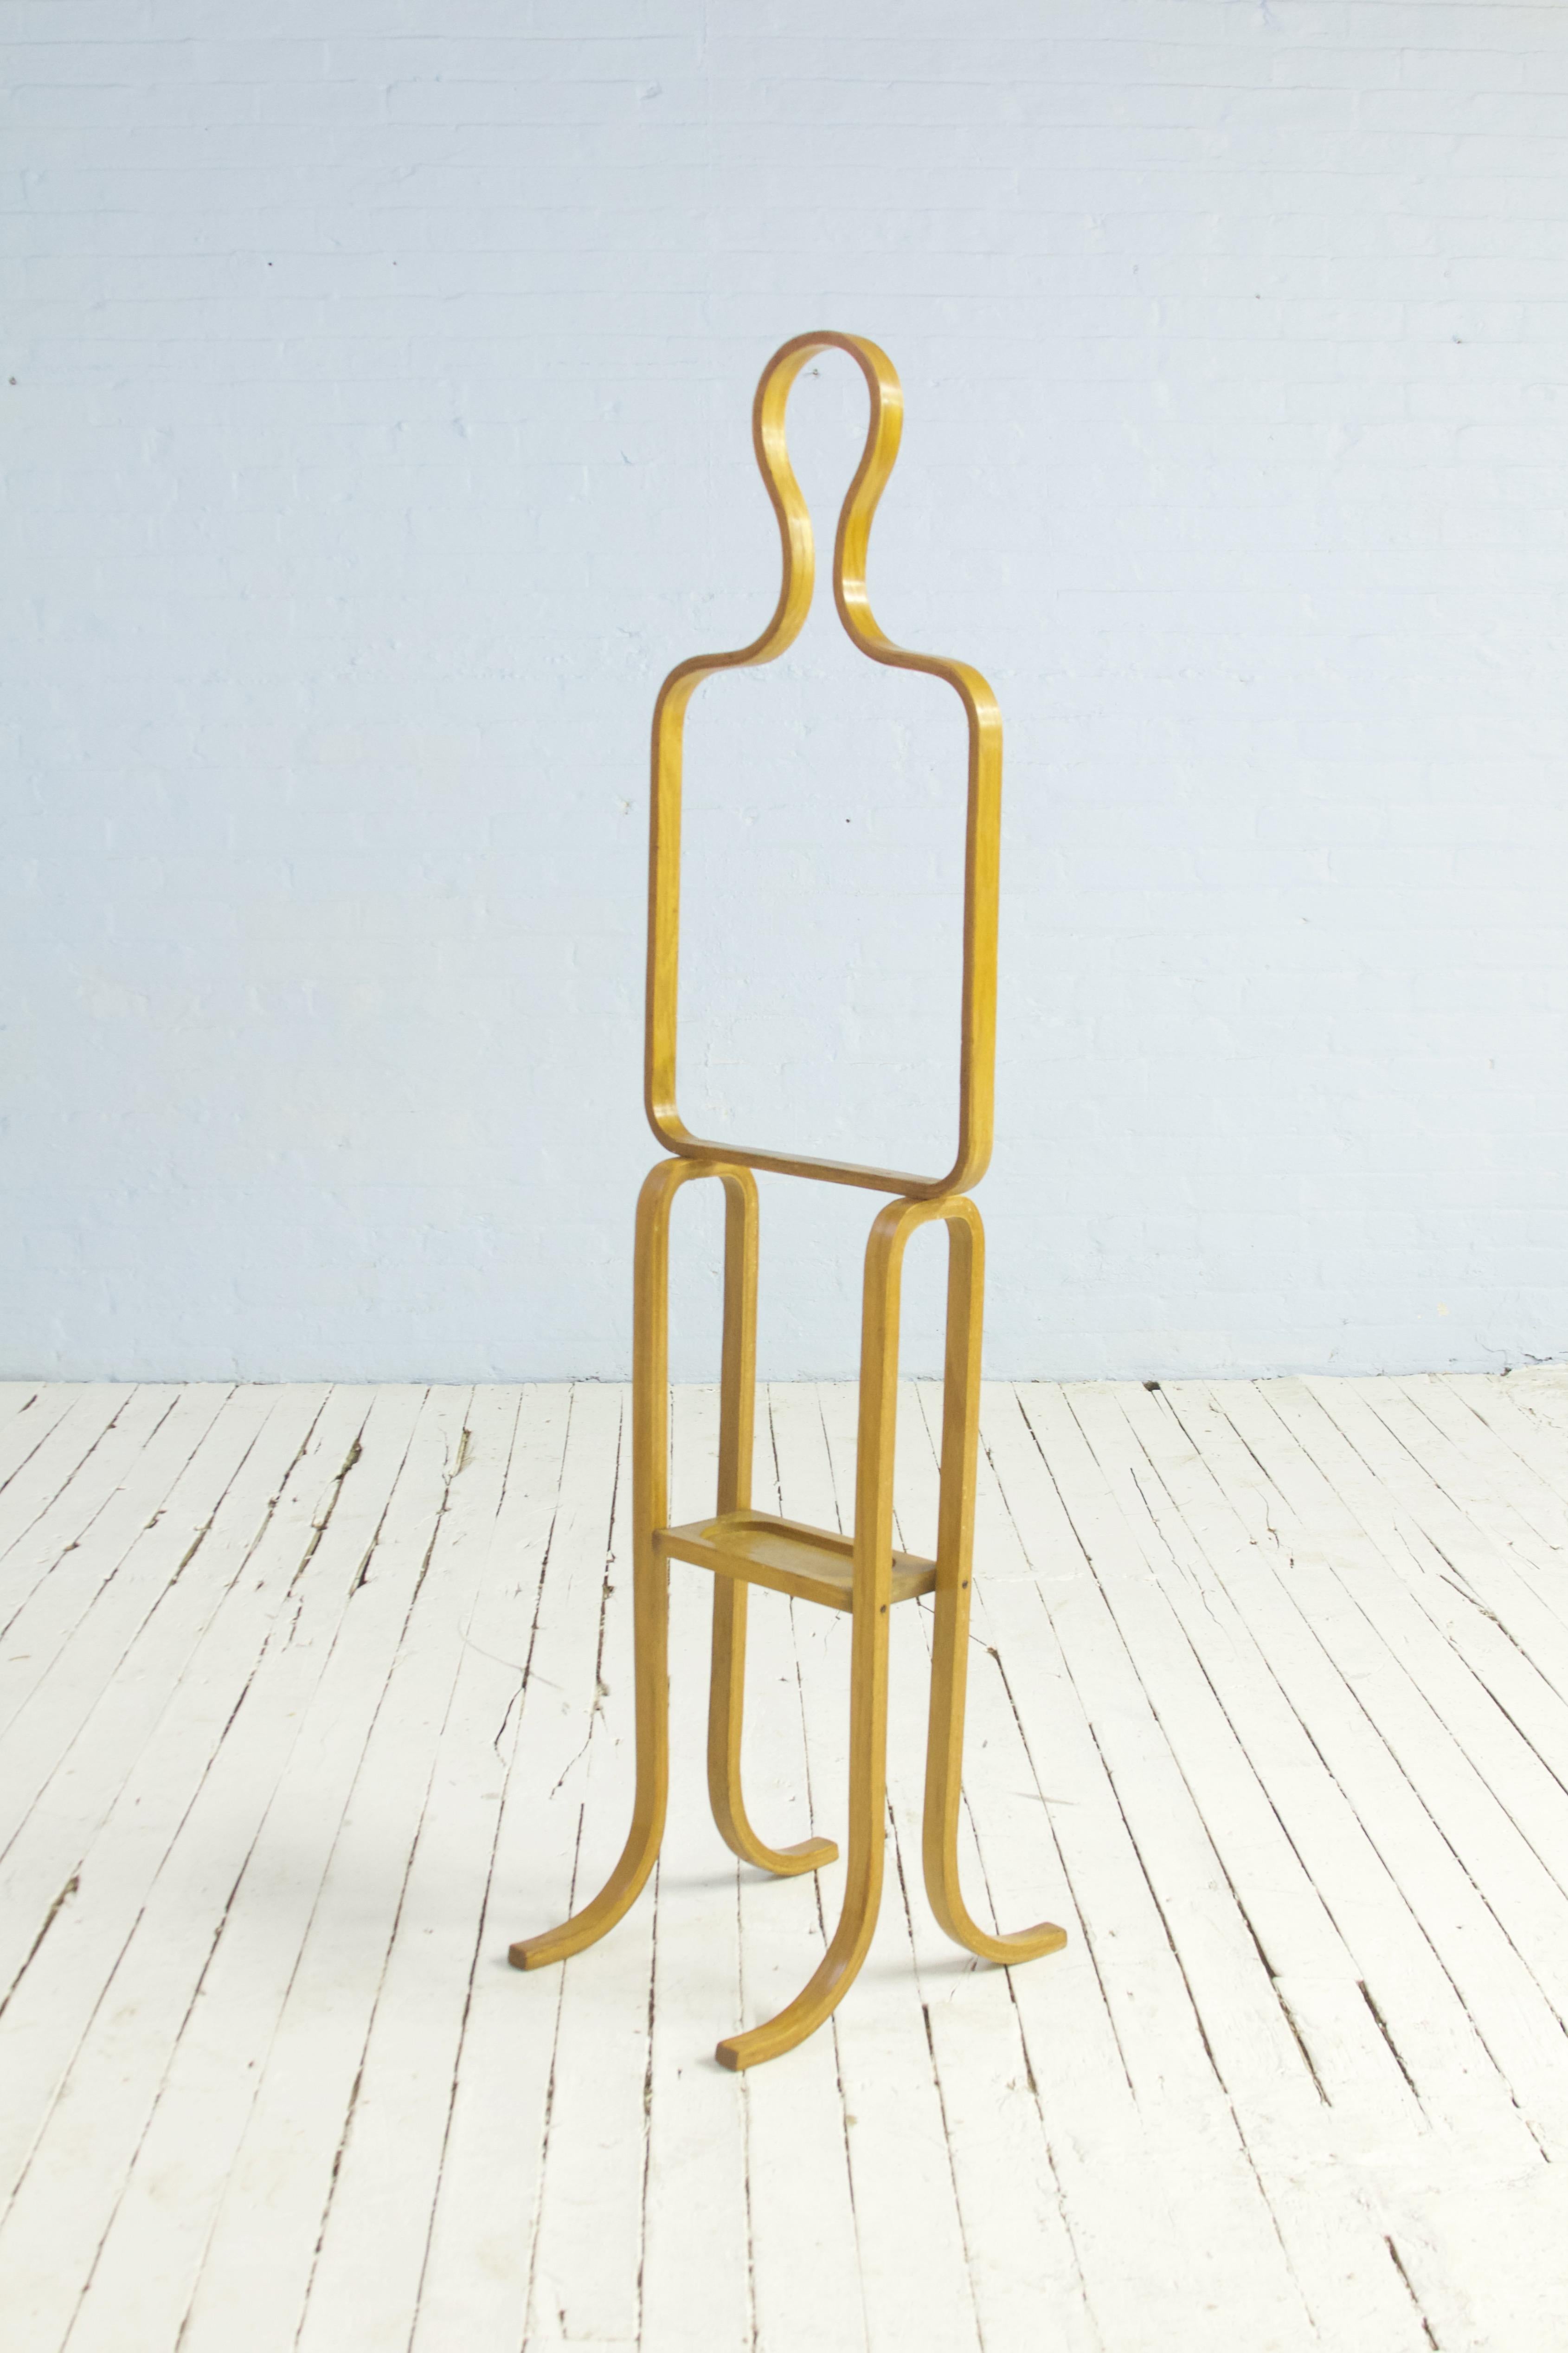 Playful bent-laminated beech valet in the shape of a standing figure, United States circa 1950. This piece can support a hat as well as jackets and features a solid beech 